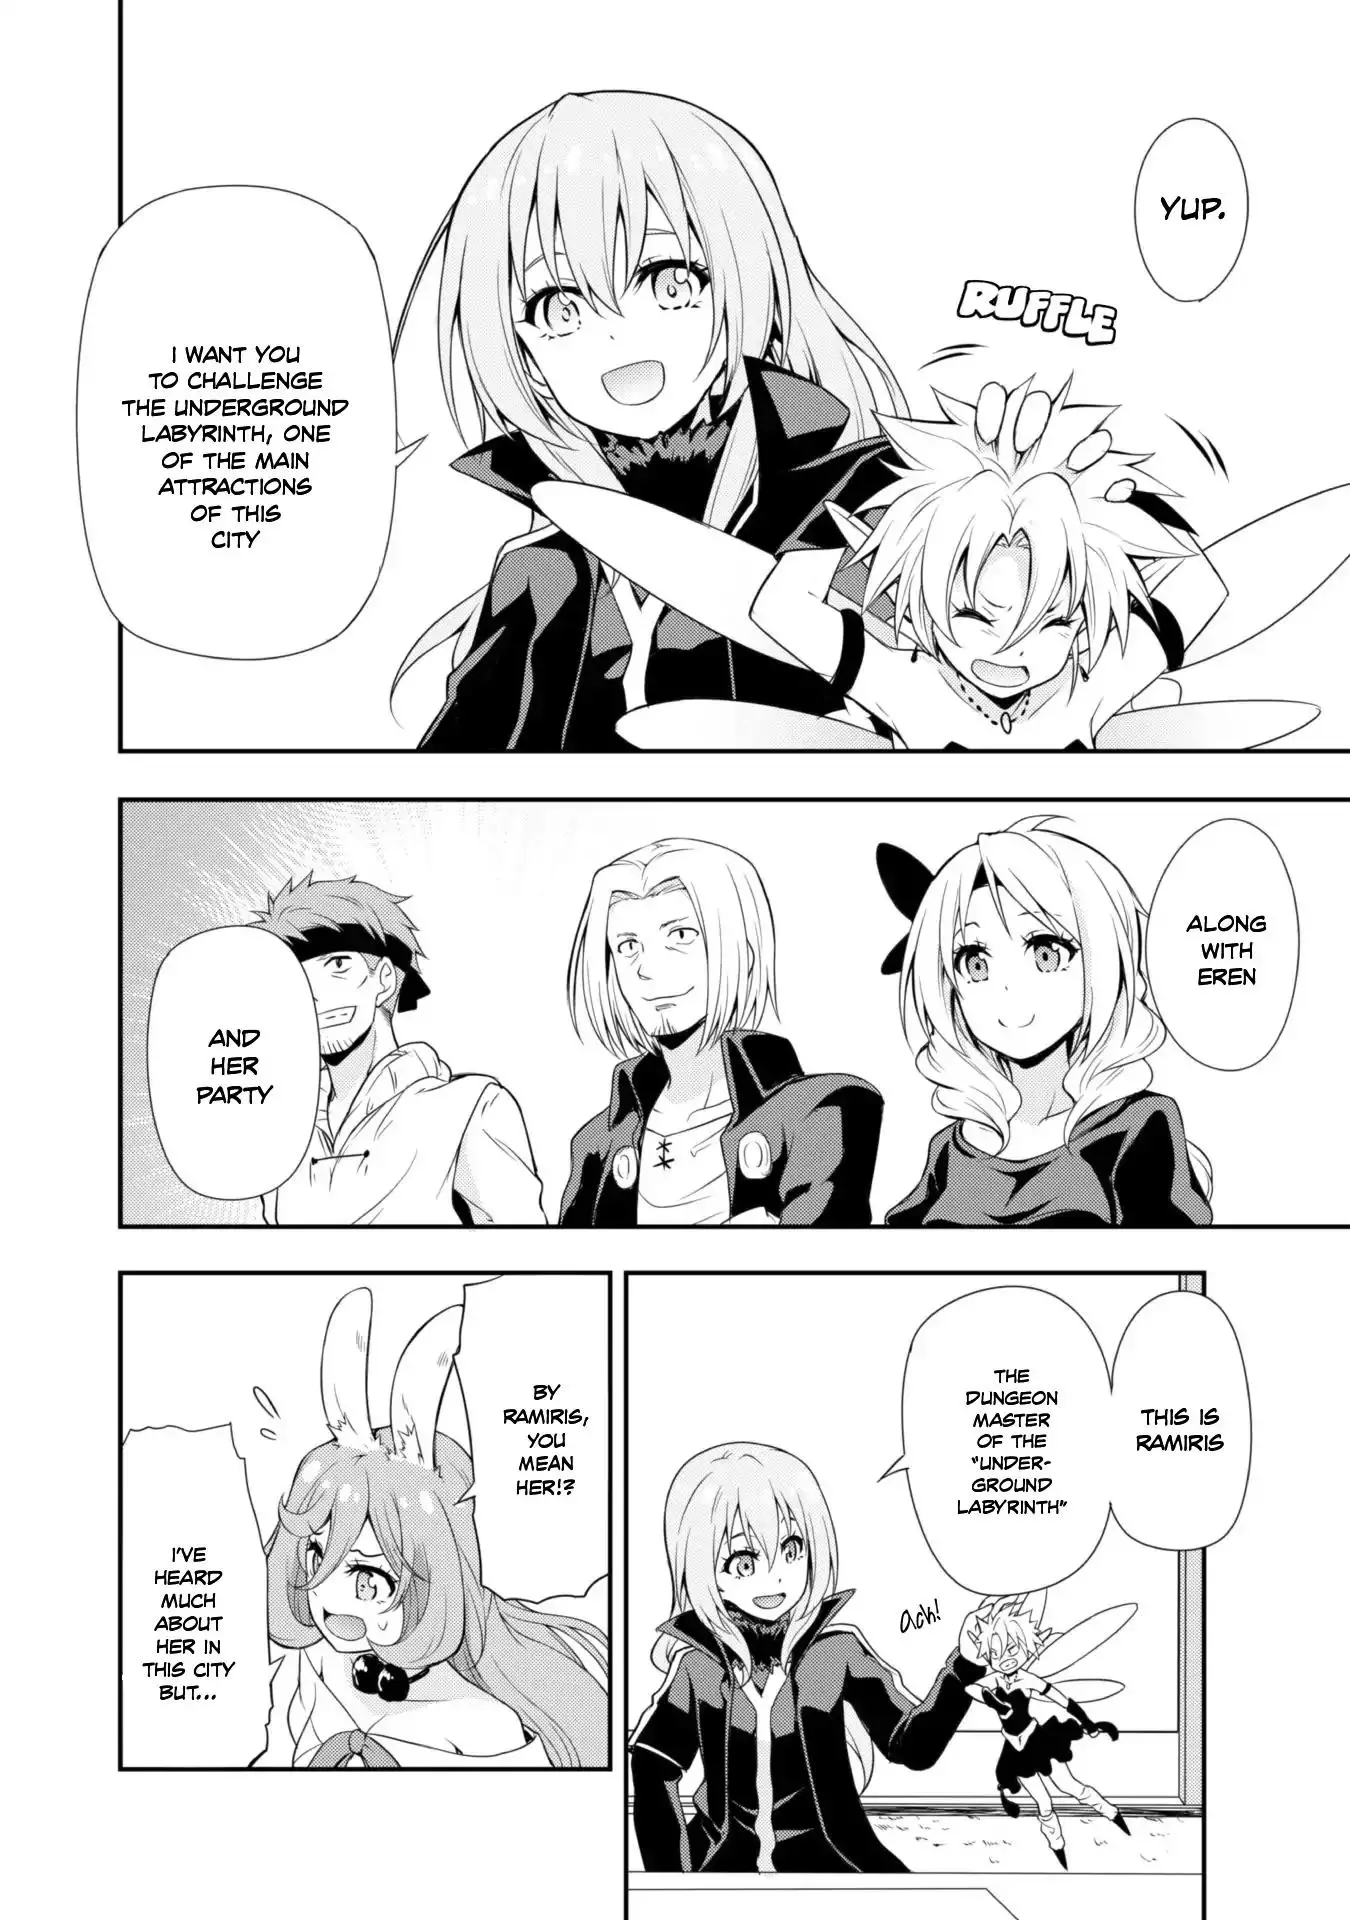 Tensei Shitara Slime Datta Ken: The Ways of Strolling in the Demon Country - 5 page 3